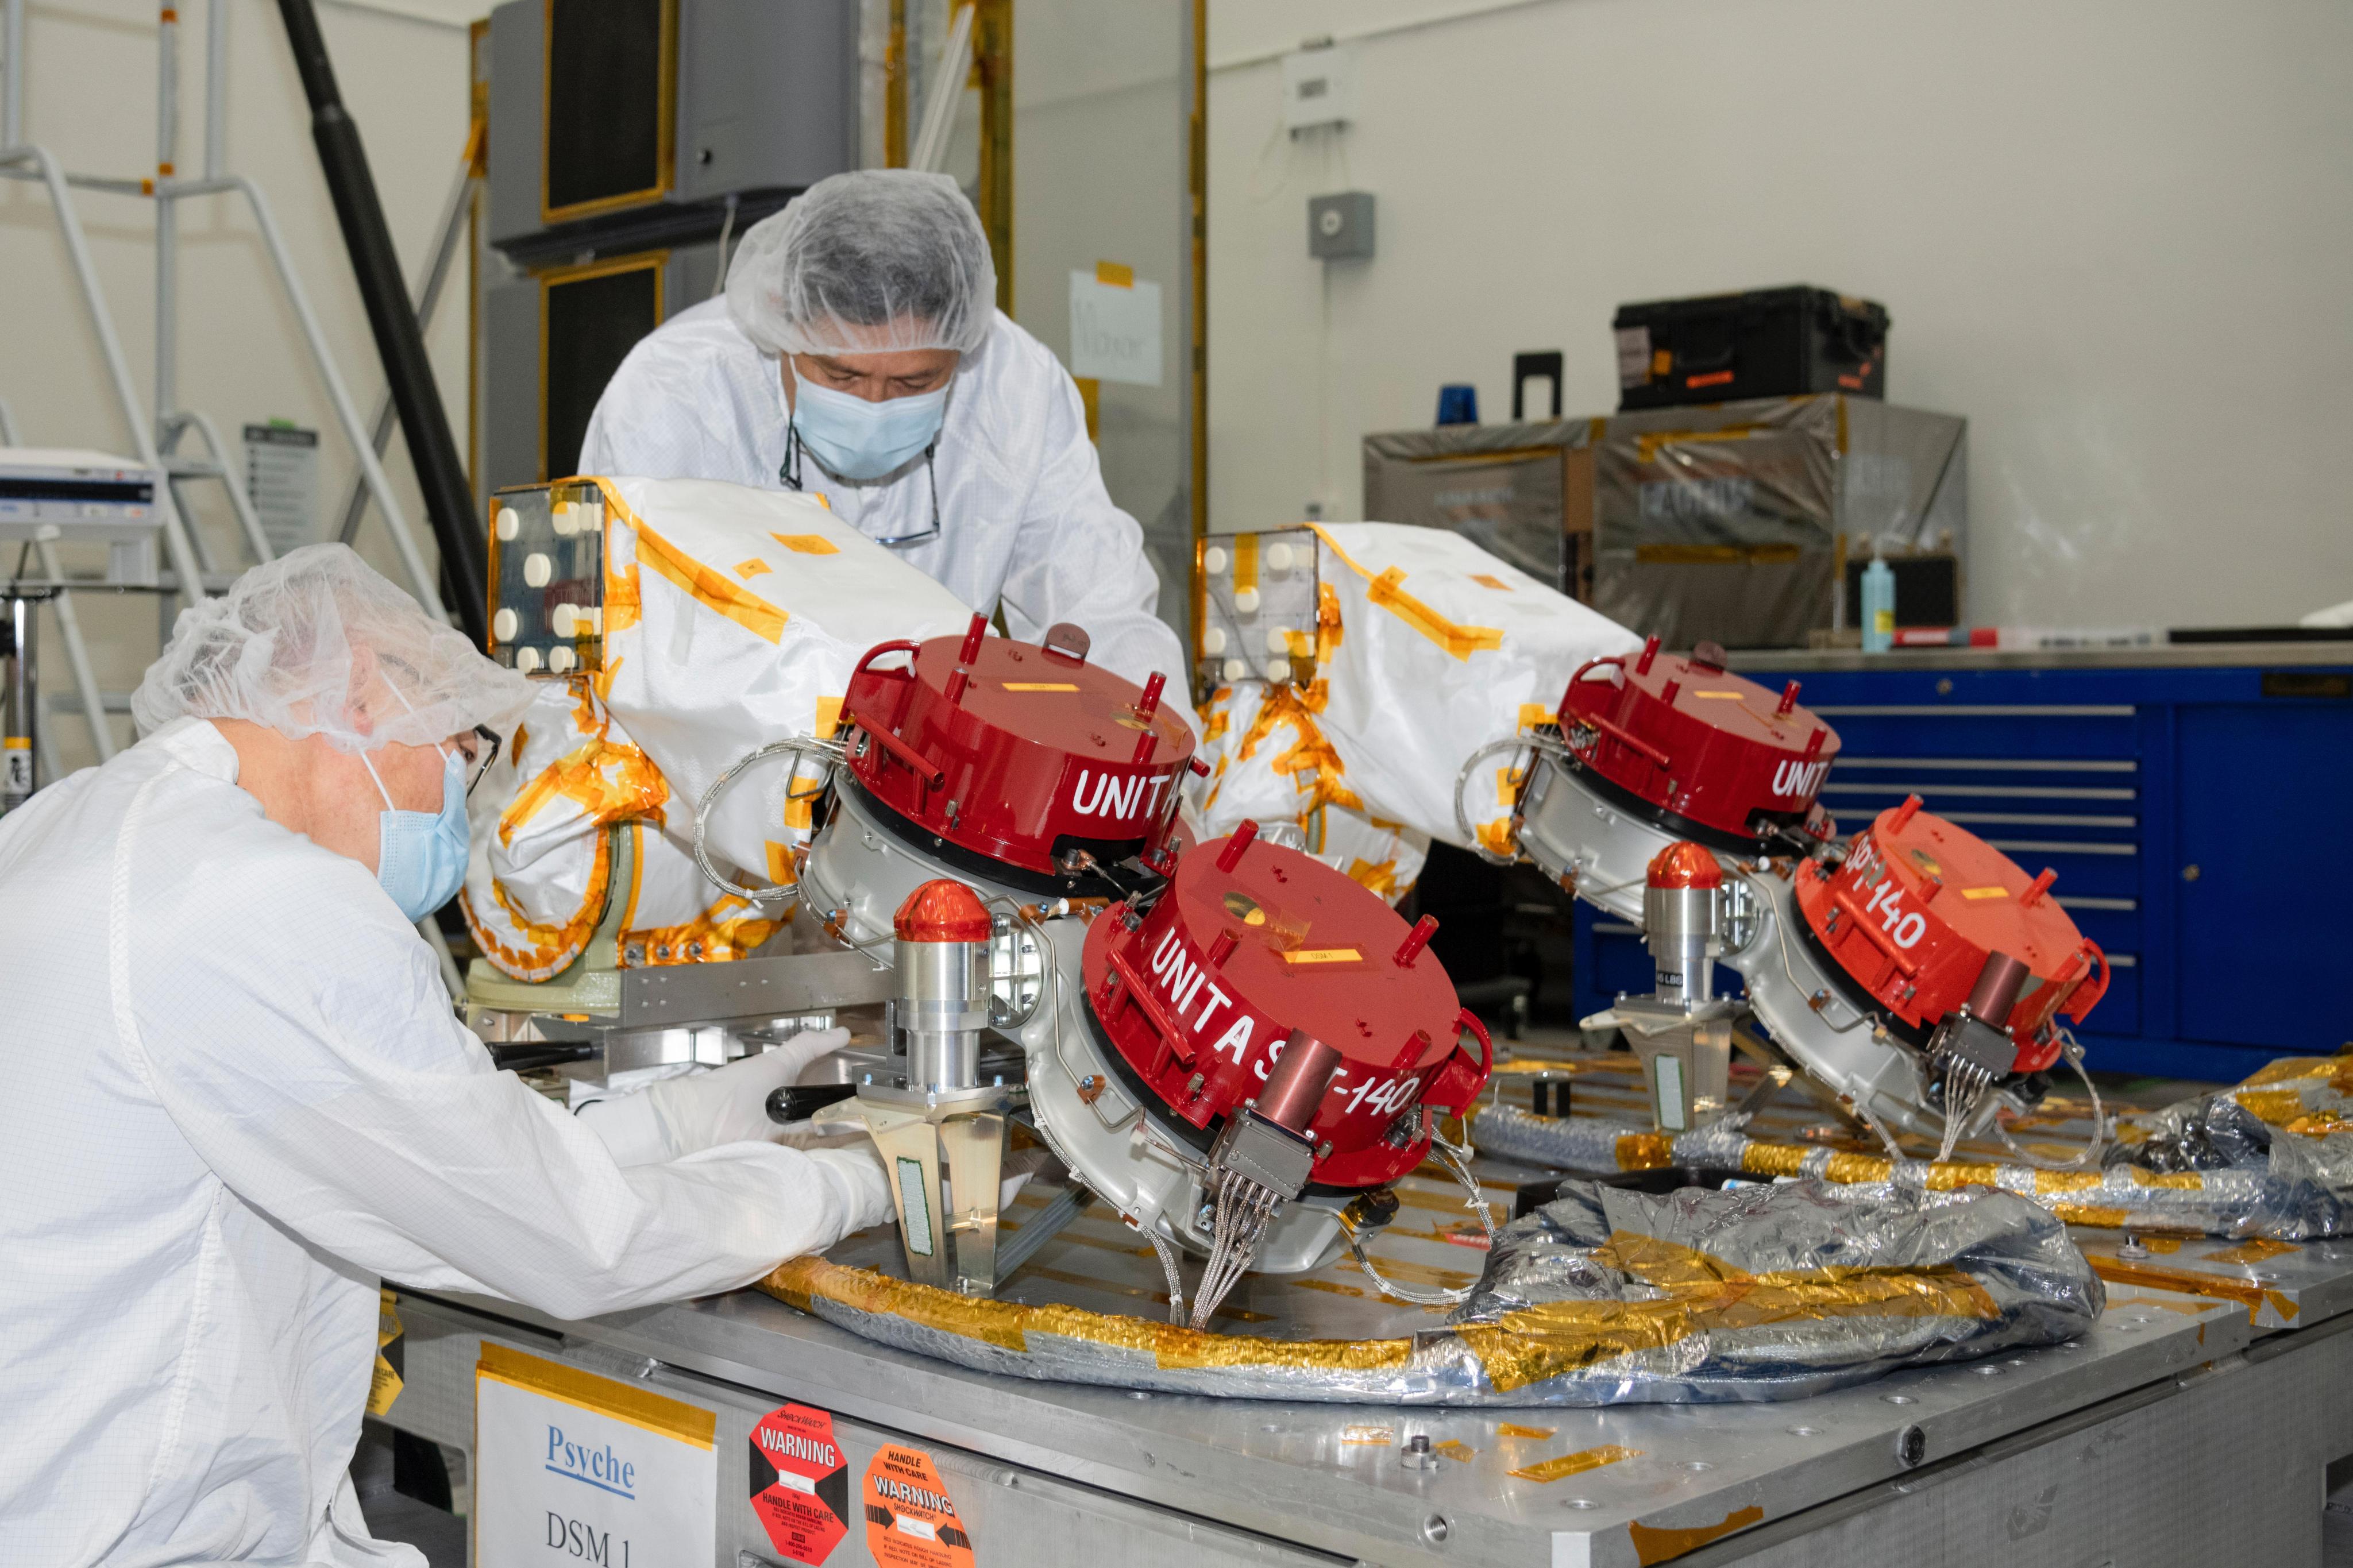 Two engineers in protective clothing work on part of the Psyche spacecraft. Red protective covers can be seen covering the four Hall thrusters.